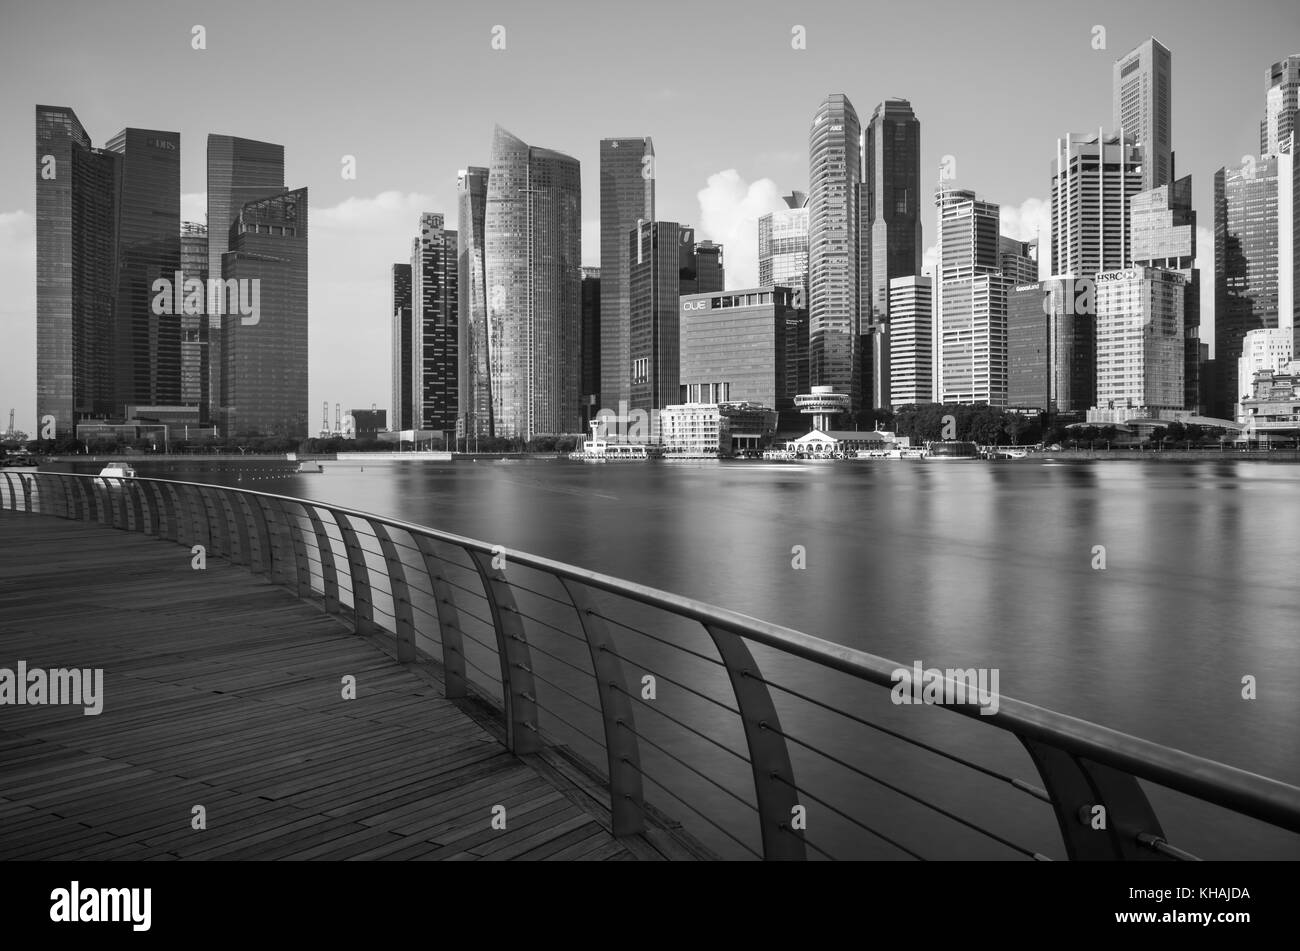 Singapore City skyline seen from the pier Stock Photo